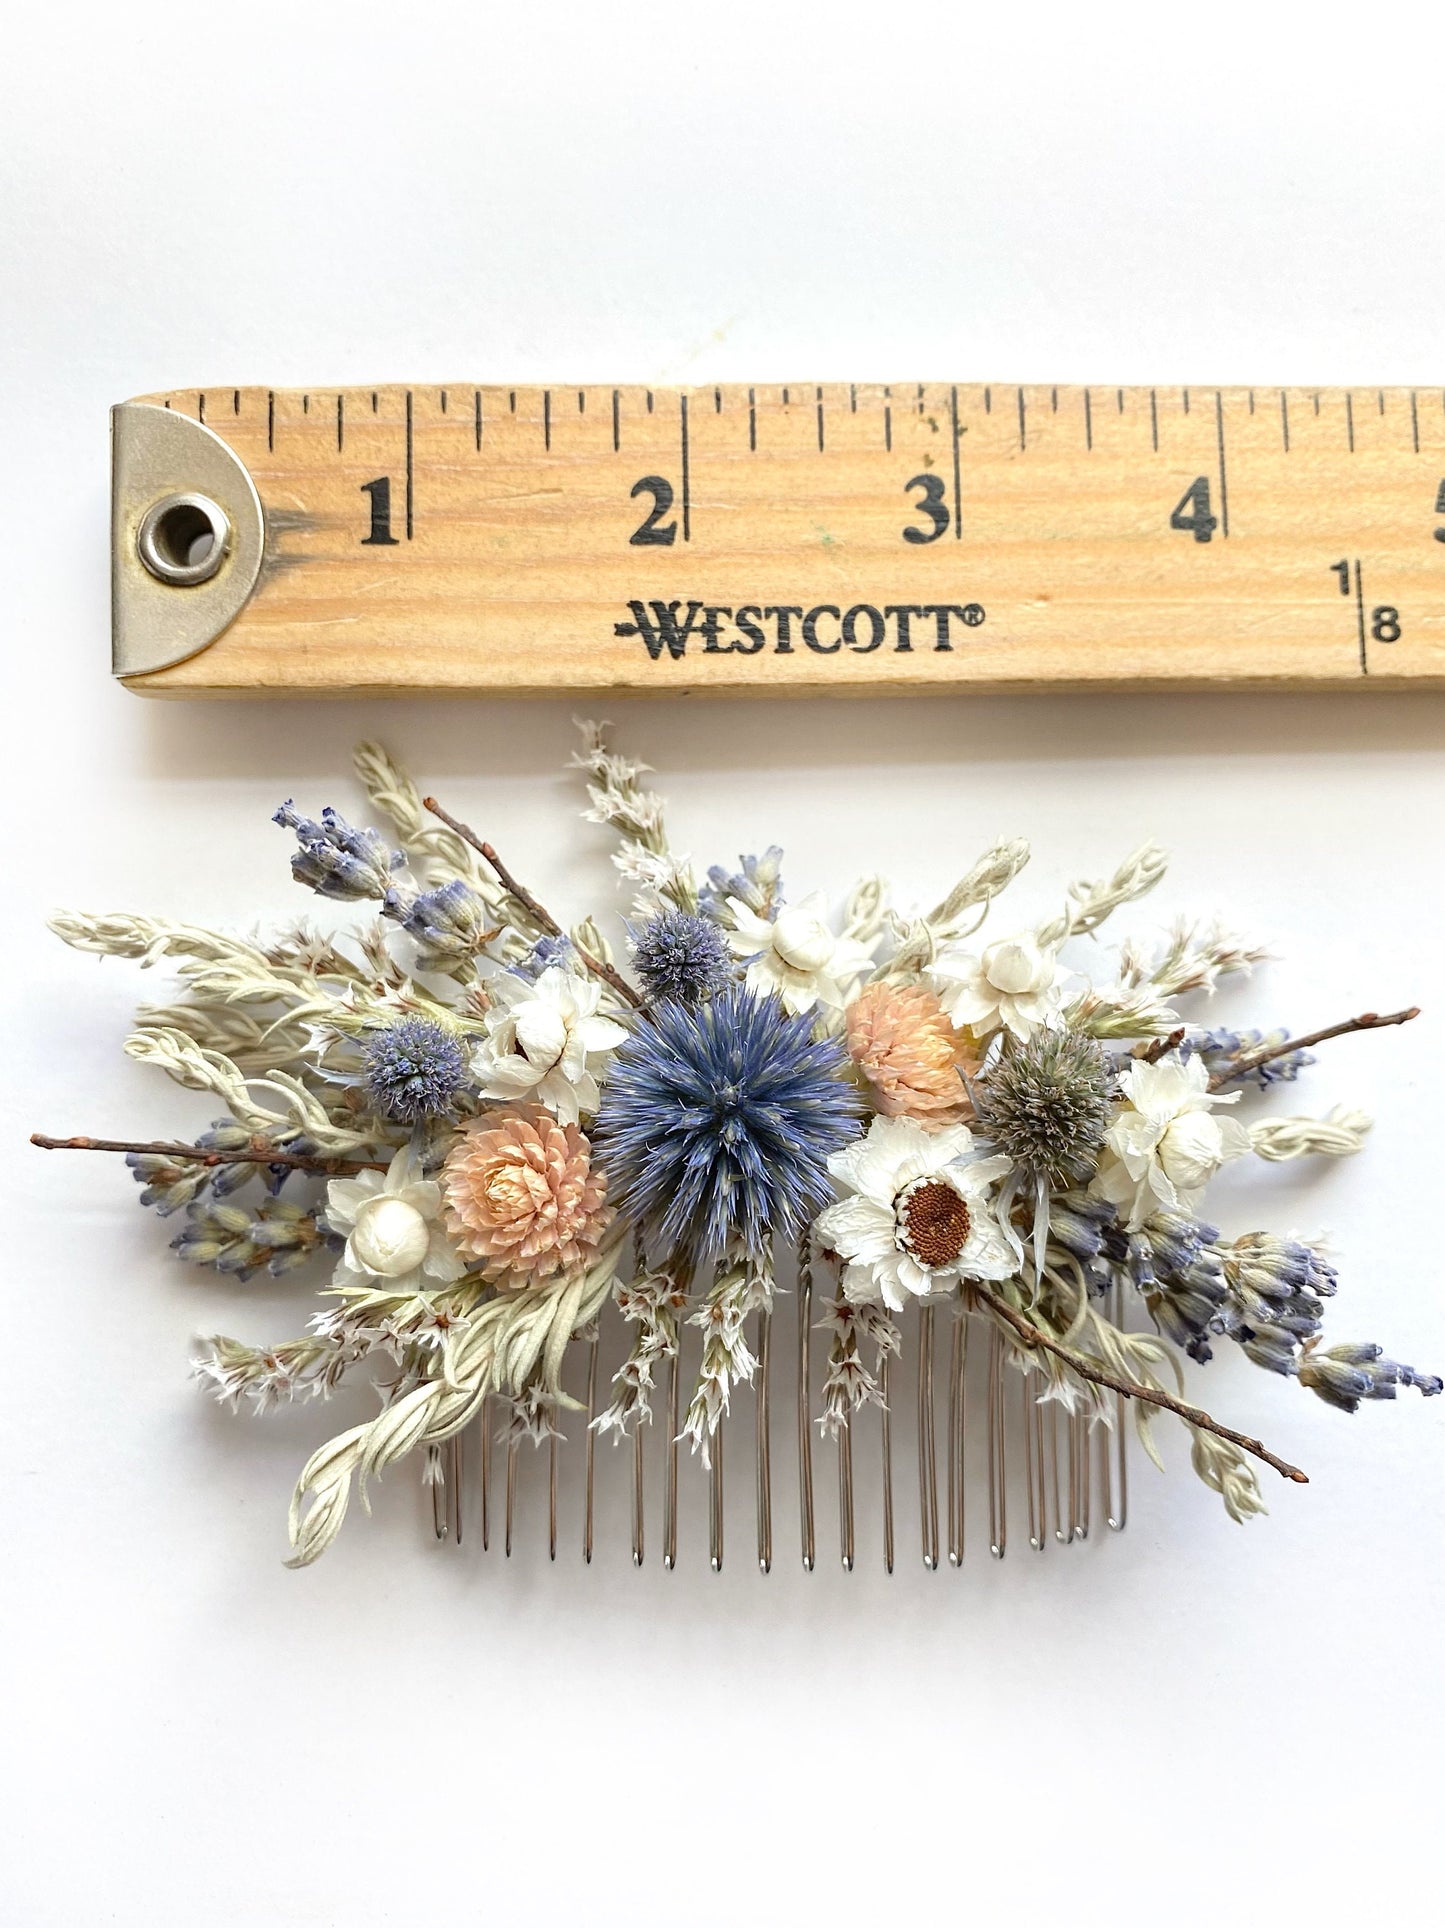 Hair Comb, Summer Hair Pins, Dried flowers, Preserved, Floral Comb, Clip, Wedding, Corsage, Prom, Bridal, Pink, Blue, White, Natural